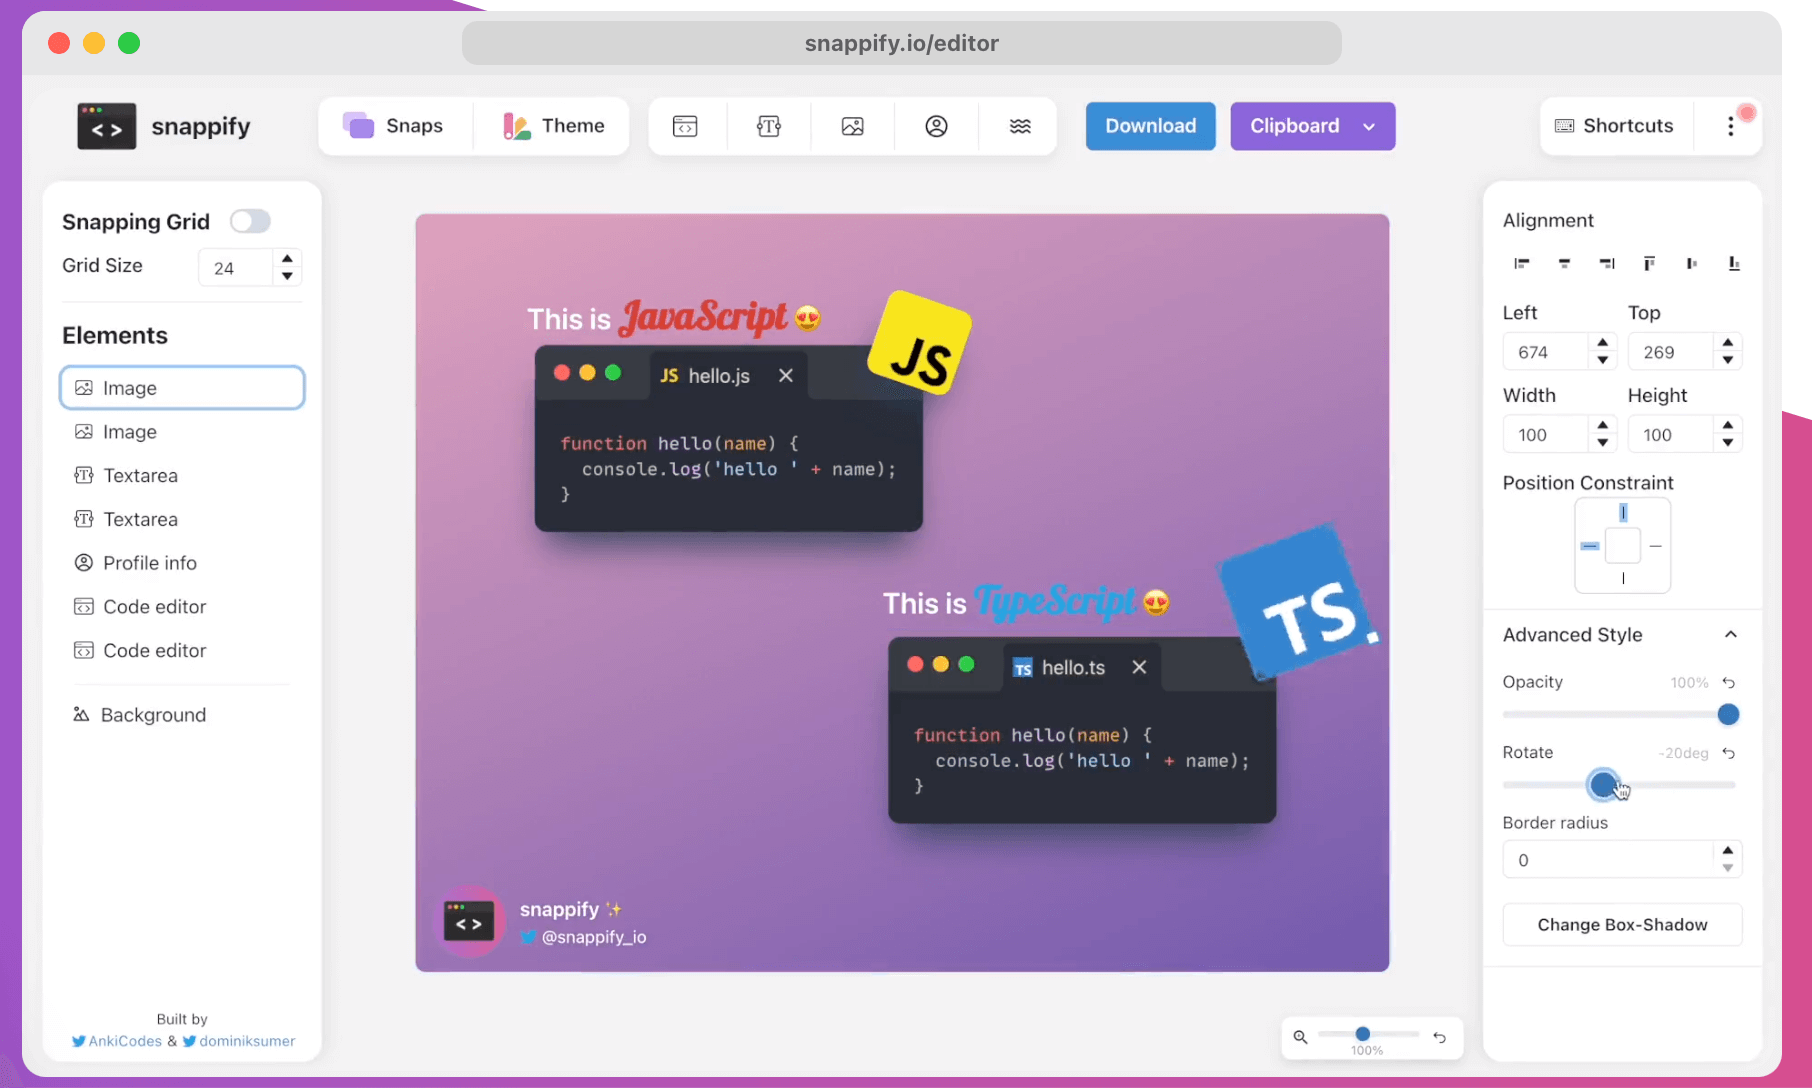 snappify - Create beautiful code snippets with ease